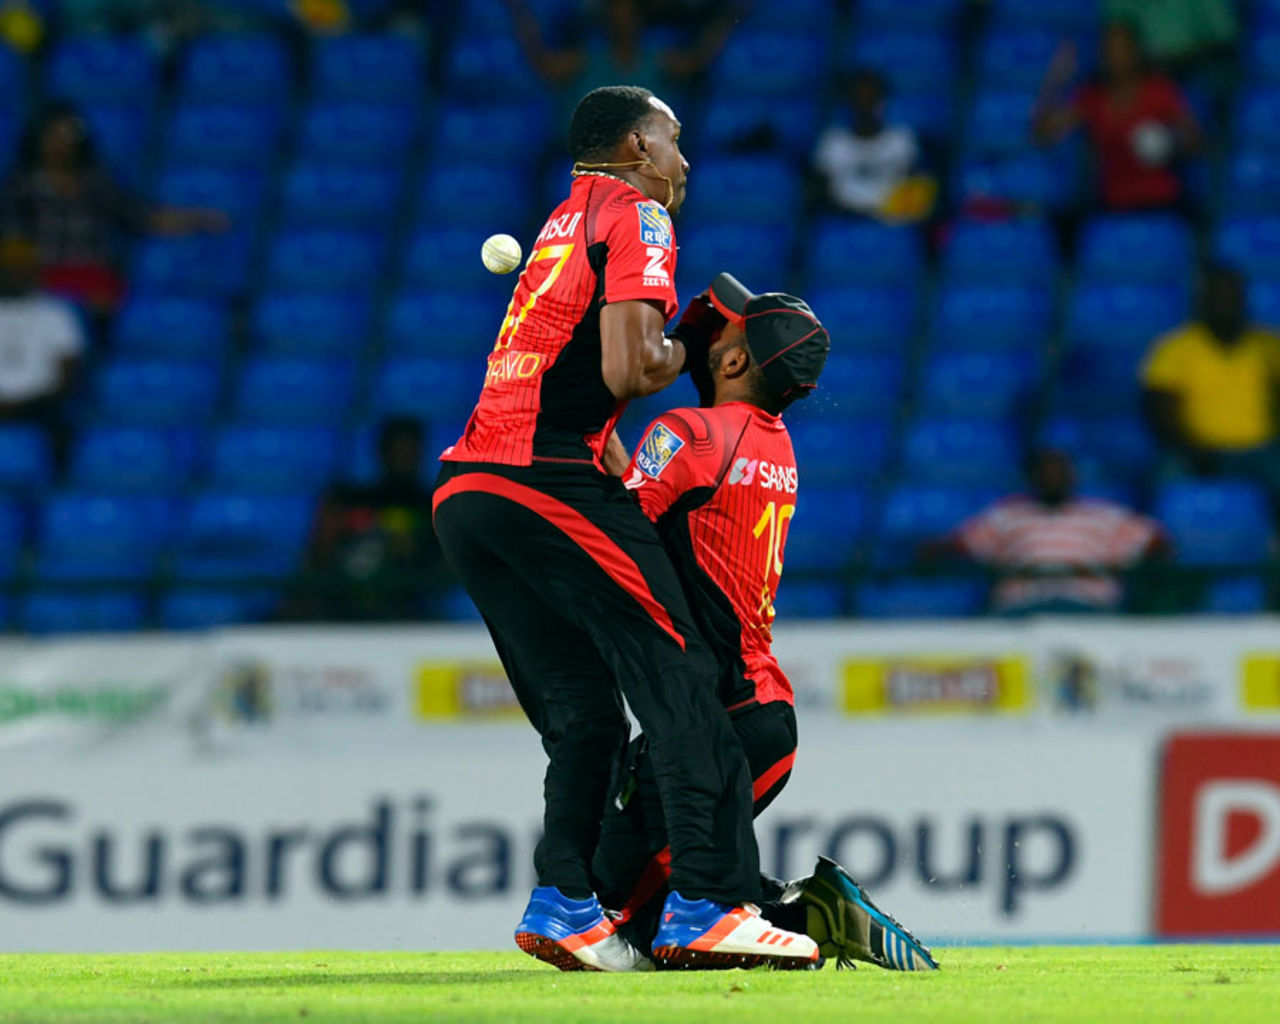 Dwayne Bravo and Yannic Cariah collide, St Lucia Zouks v Trinbago Knight Riders, CPL 2016, eliminator, St Kitts, August 4, 2016